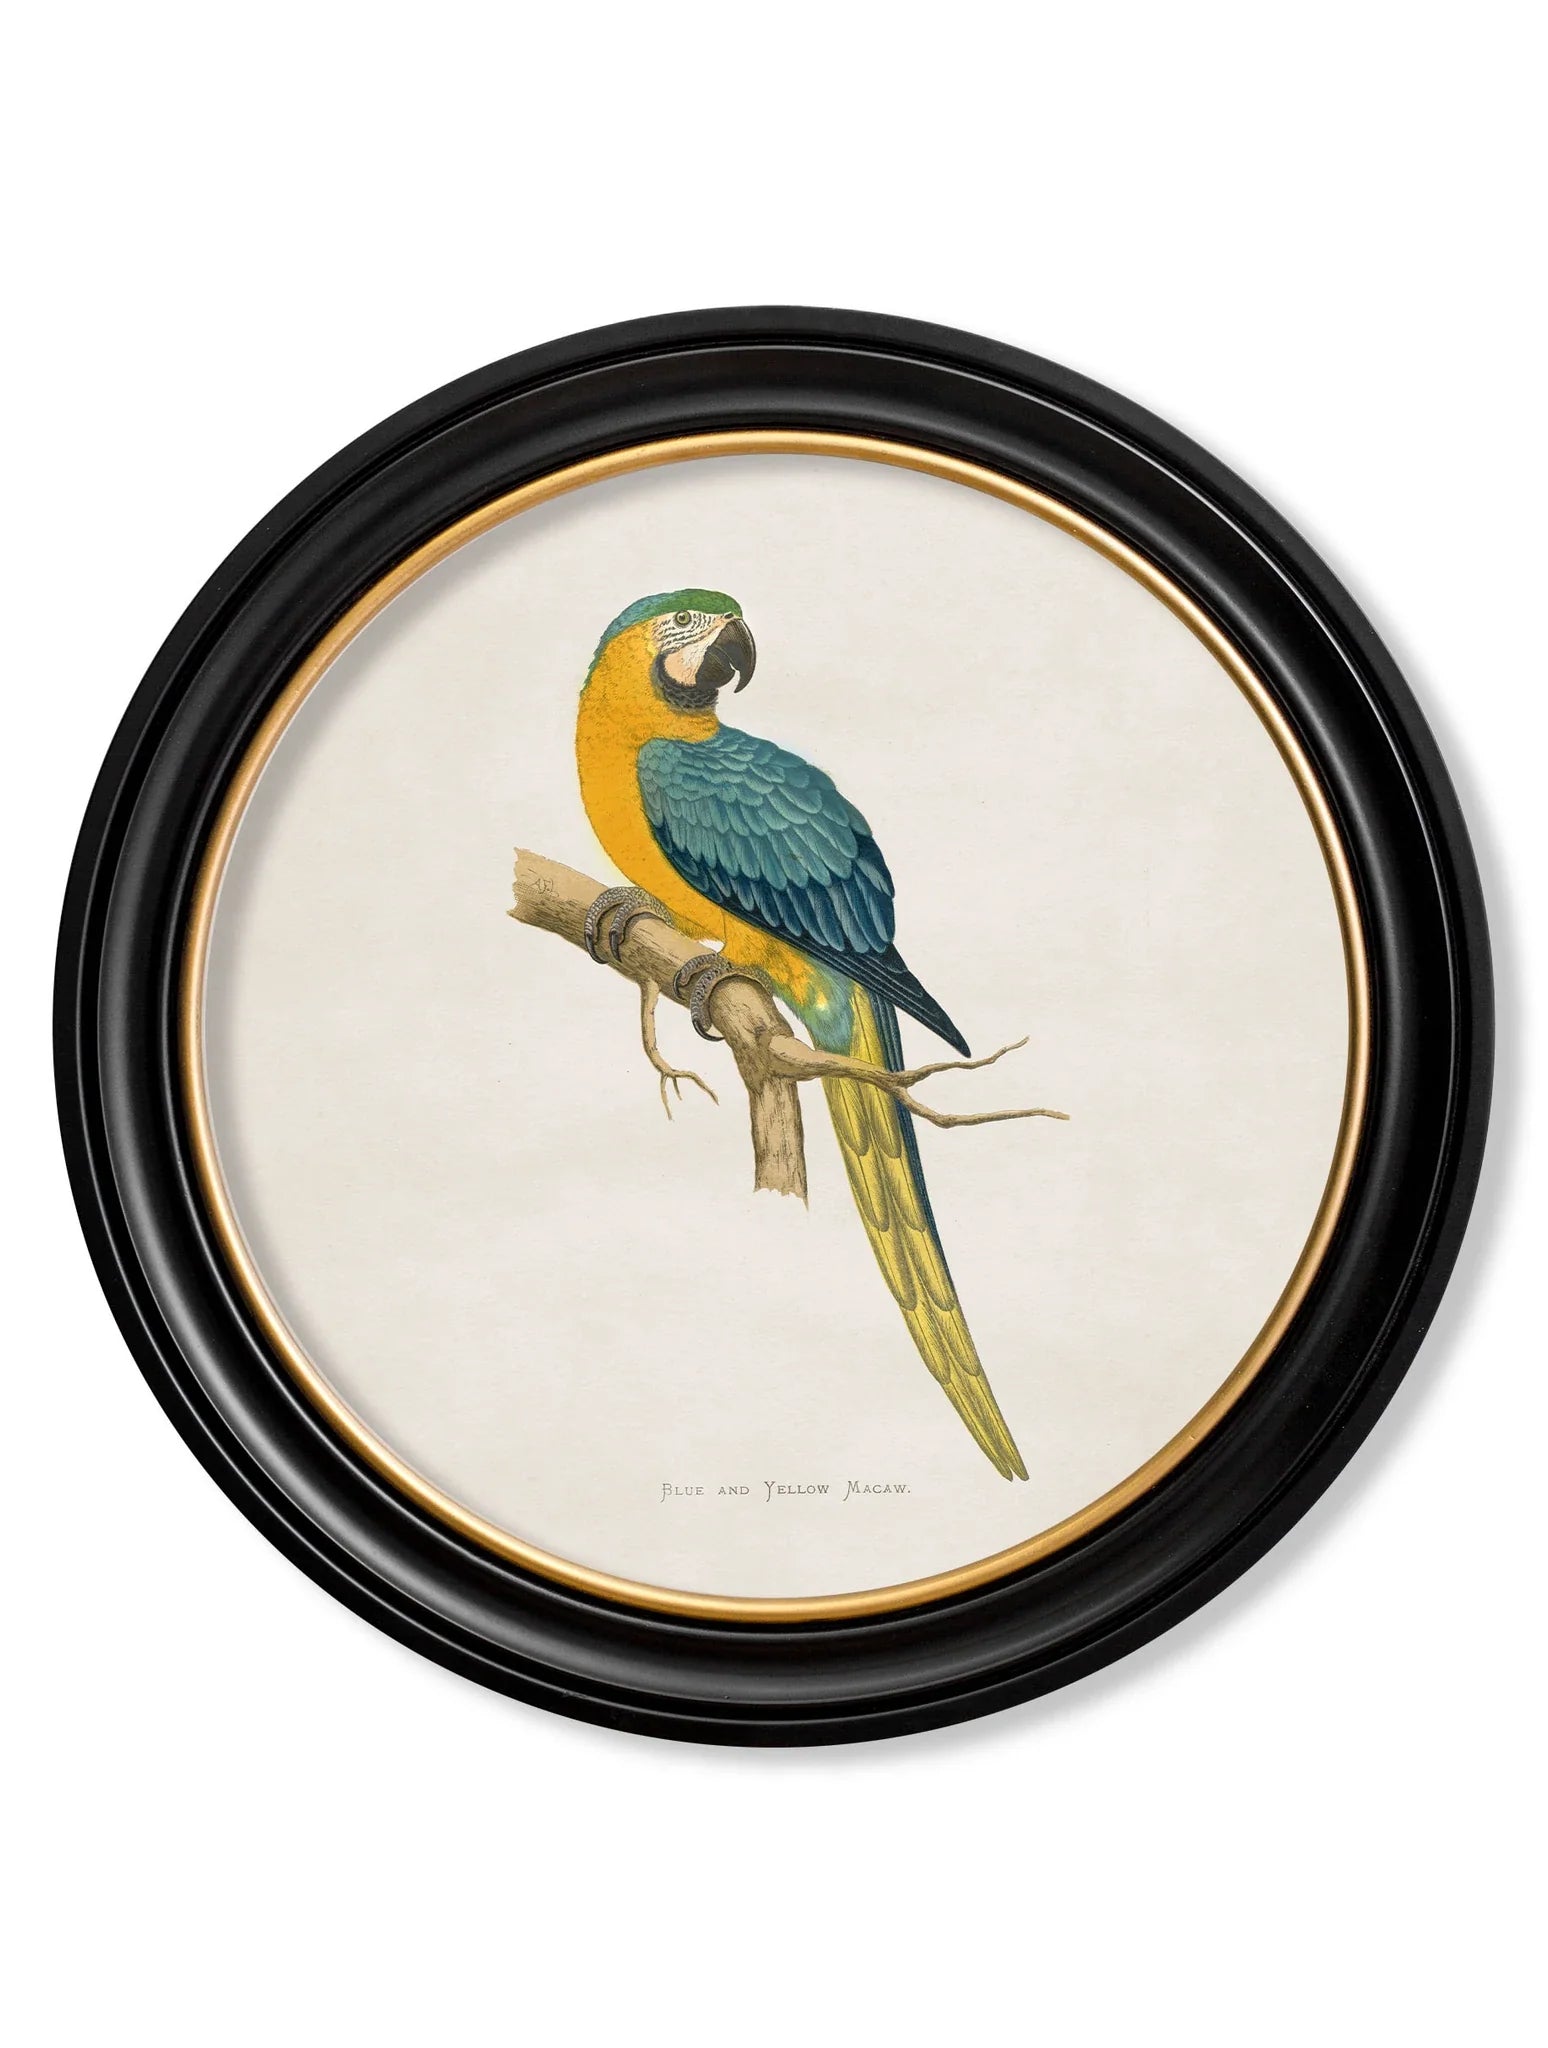 C.1884 Collections Of Macaws In Round Frames for sale - Woodcock and Cavendish